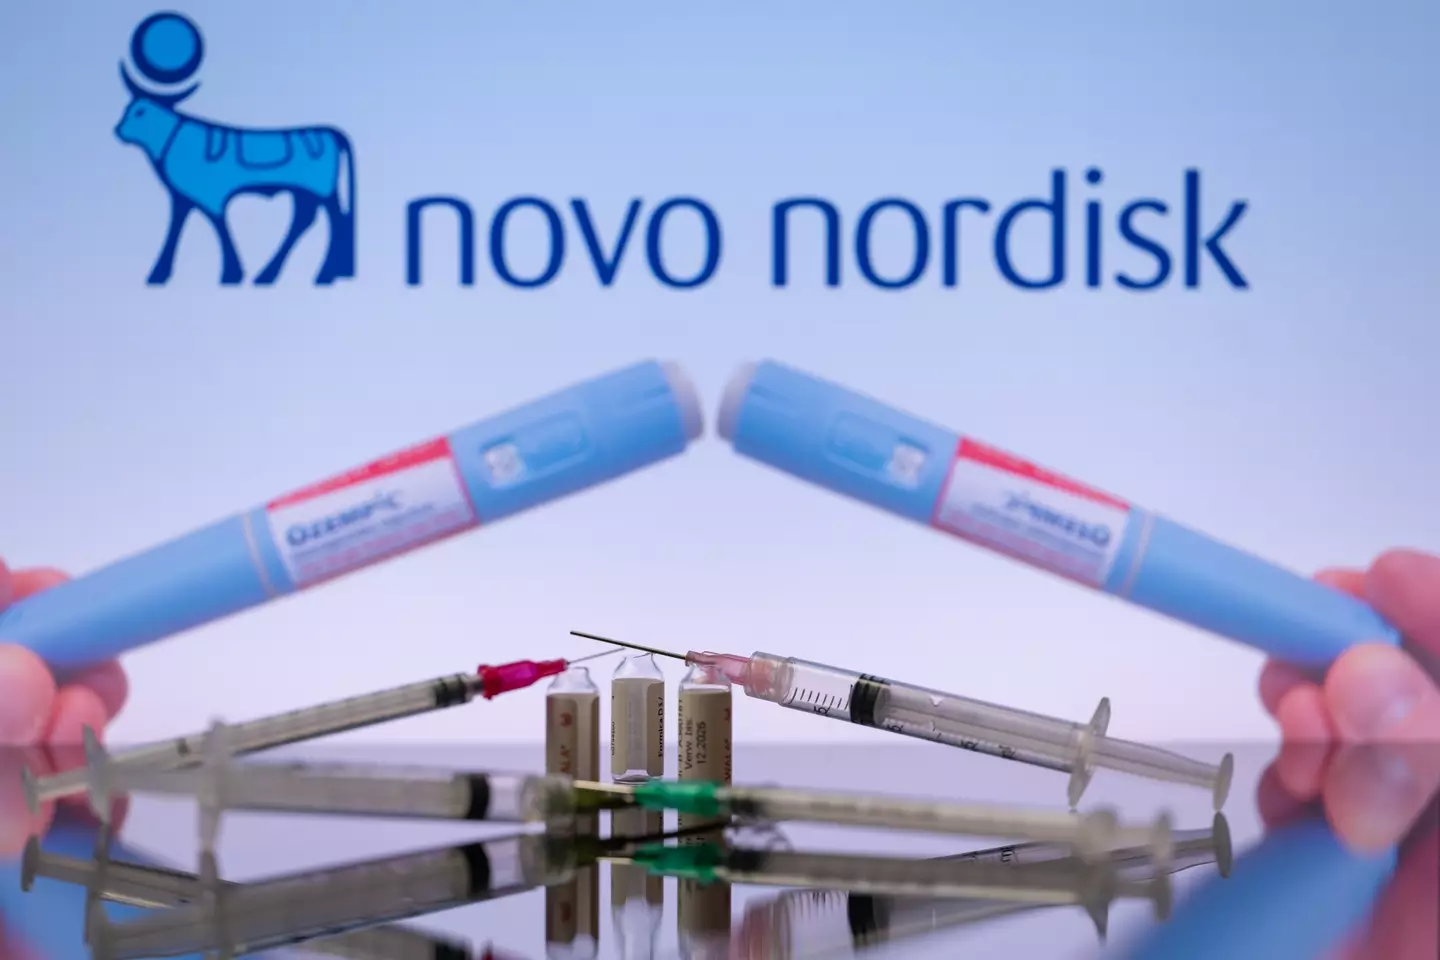 Novo Nordisk has been reportedly hit with dozens of lawsuits.